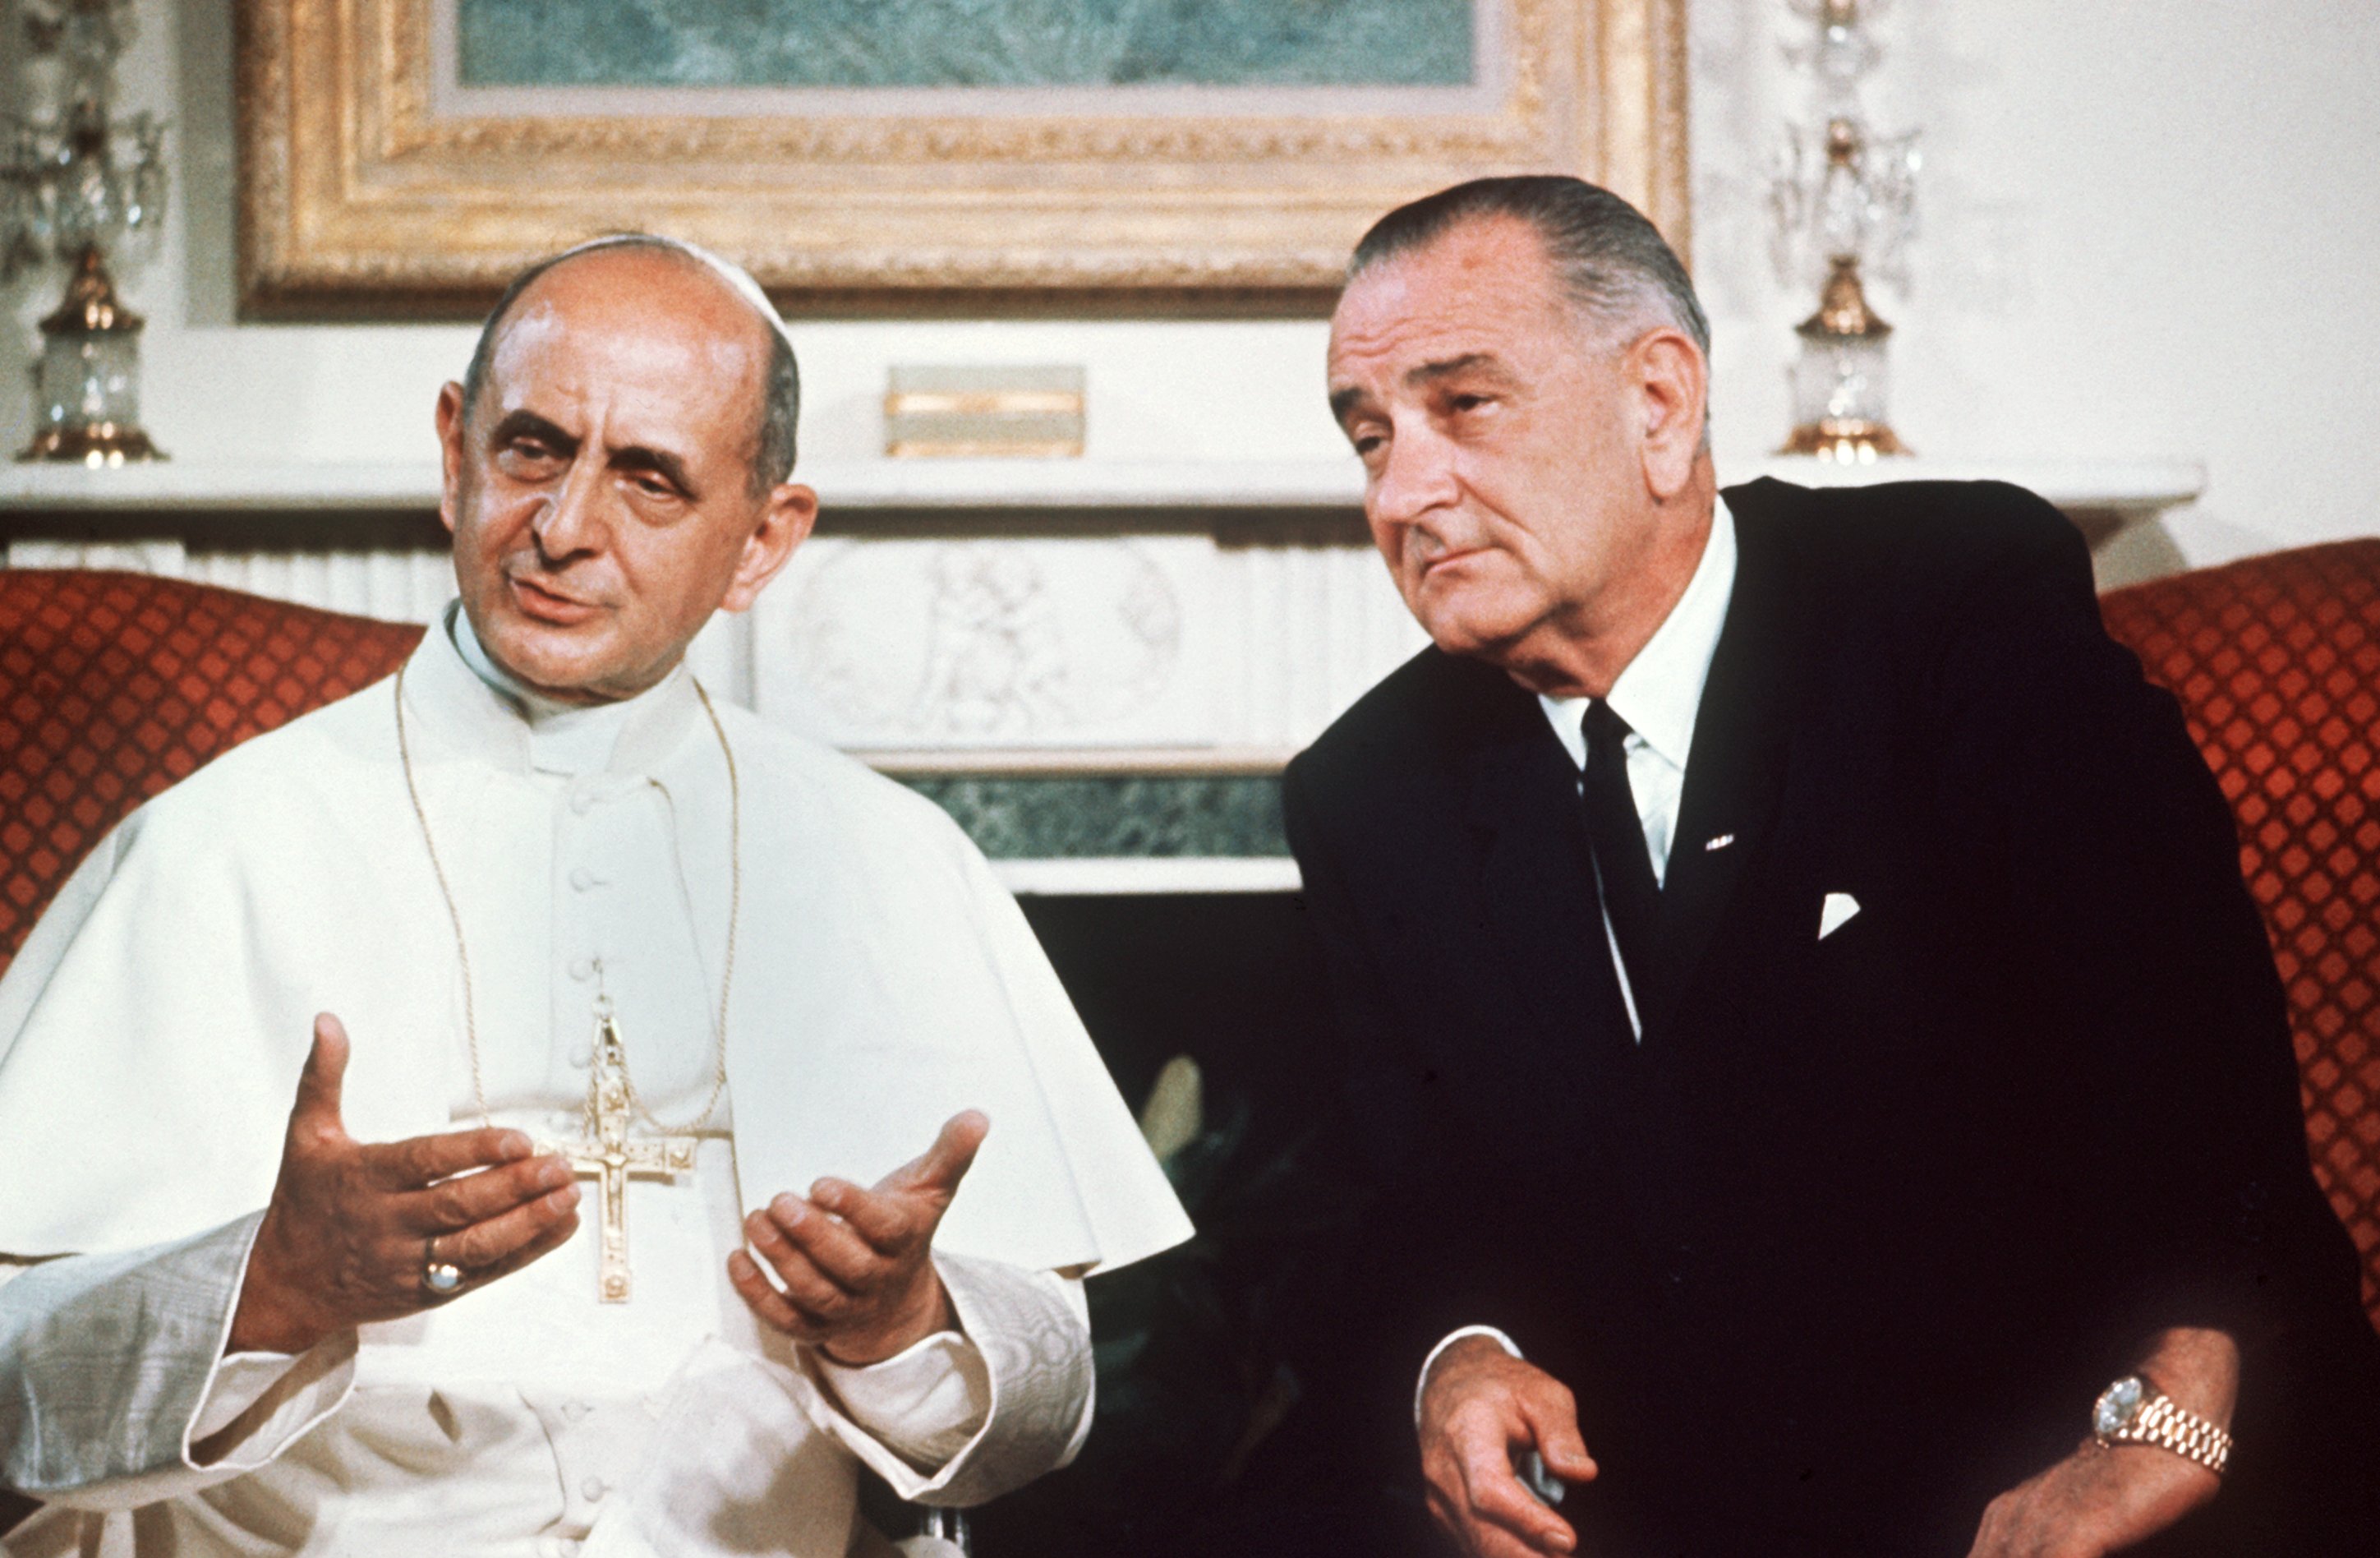 Paul VI was in New York to address the United Nations and met President Lyndon B. Johnson  at the Waldorf-Astoria Hotel in New York City. Their 46-minute talk included discussions of peace, civil rights, education, and poverty. (Photo: Schulmann-Sach/Newscom)